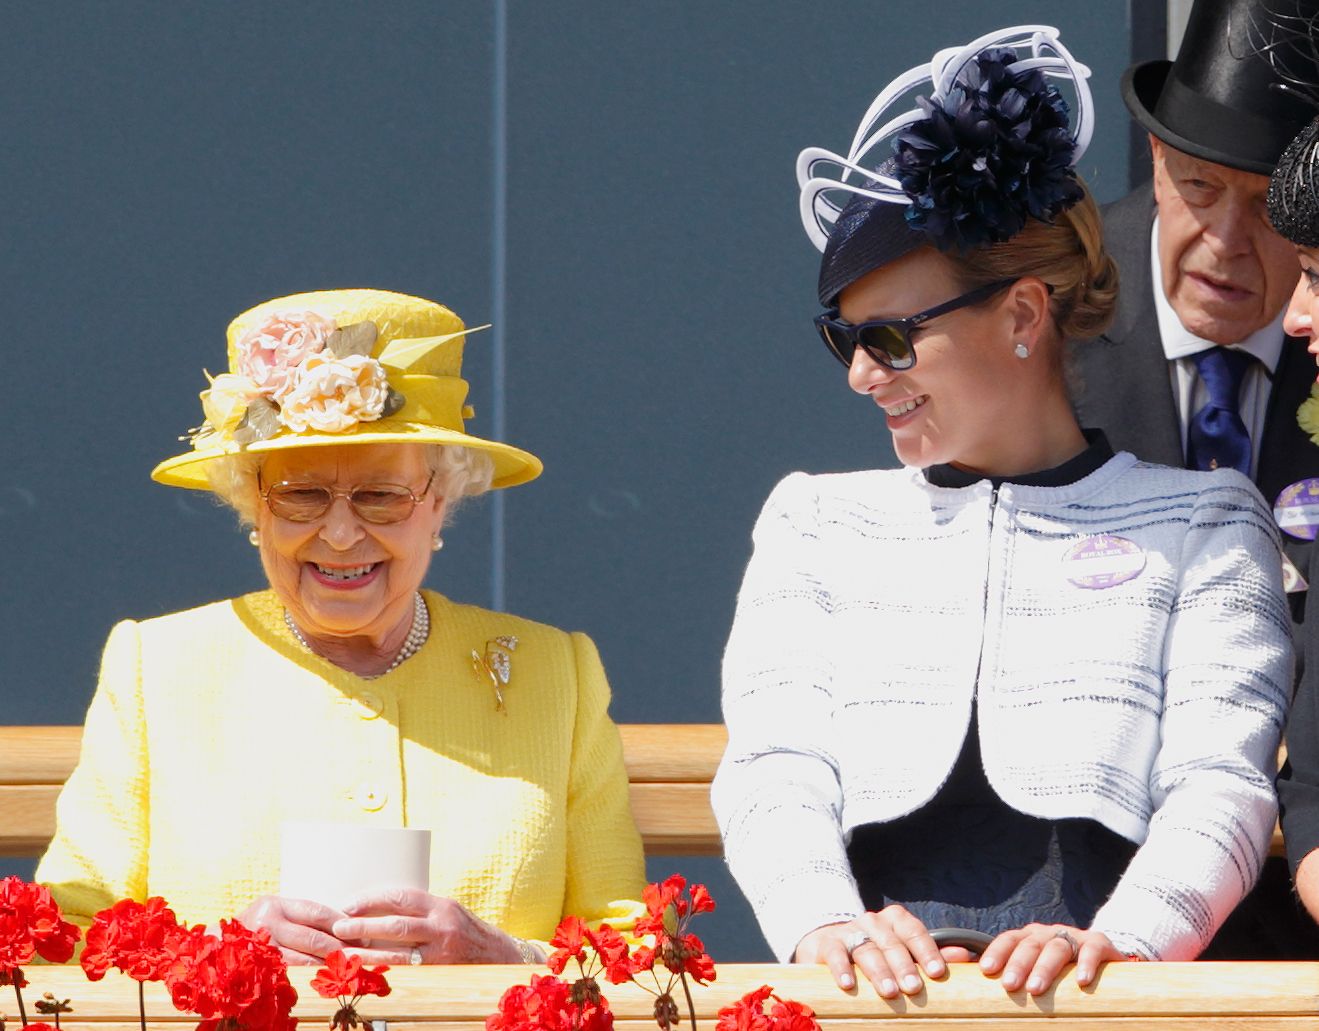 queen-elizabeth-ii-and-zara-phillips-attend-day-4-of-royal-news-photo-477797796-1539037485.jpg